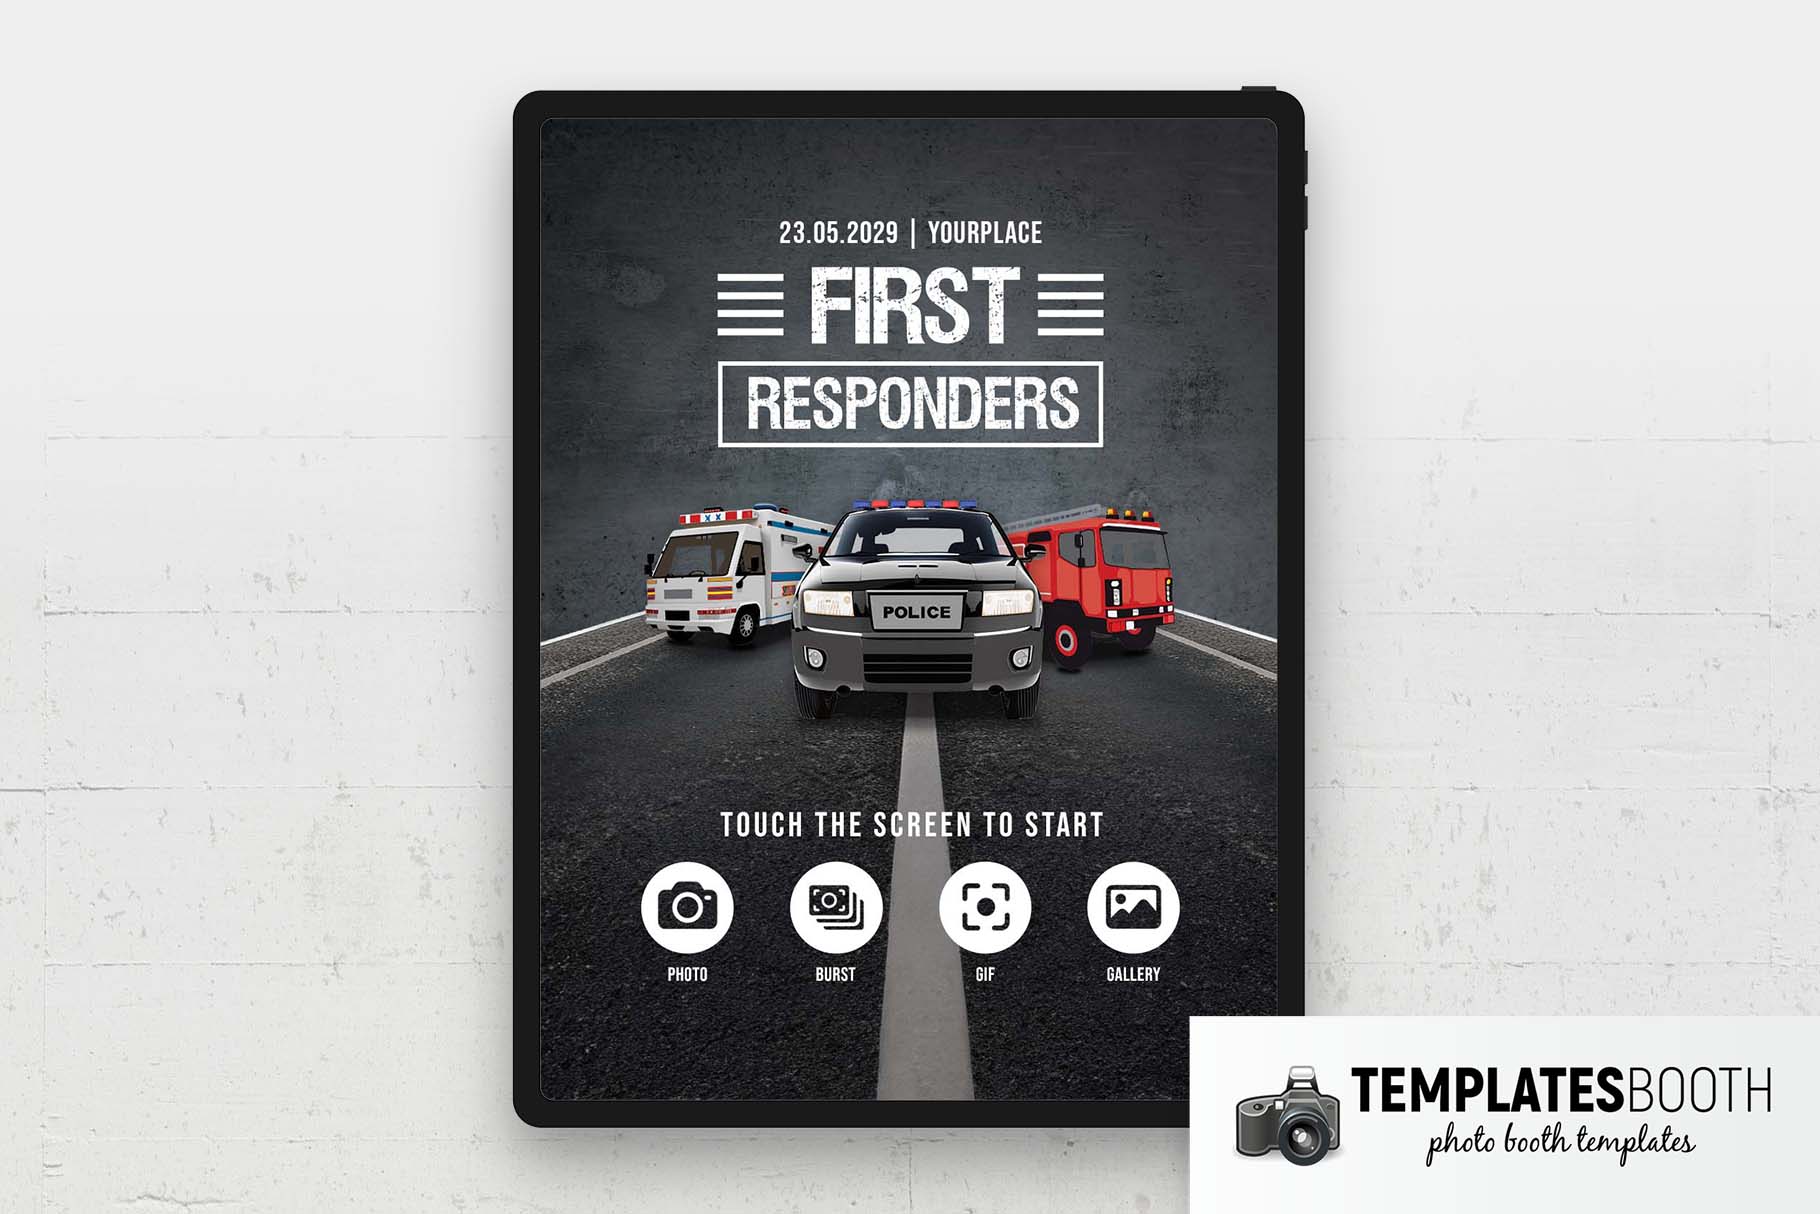 First Responders Photo Booth Welcome Screen